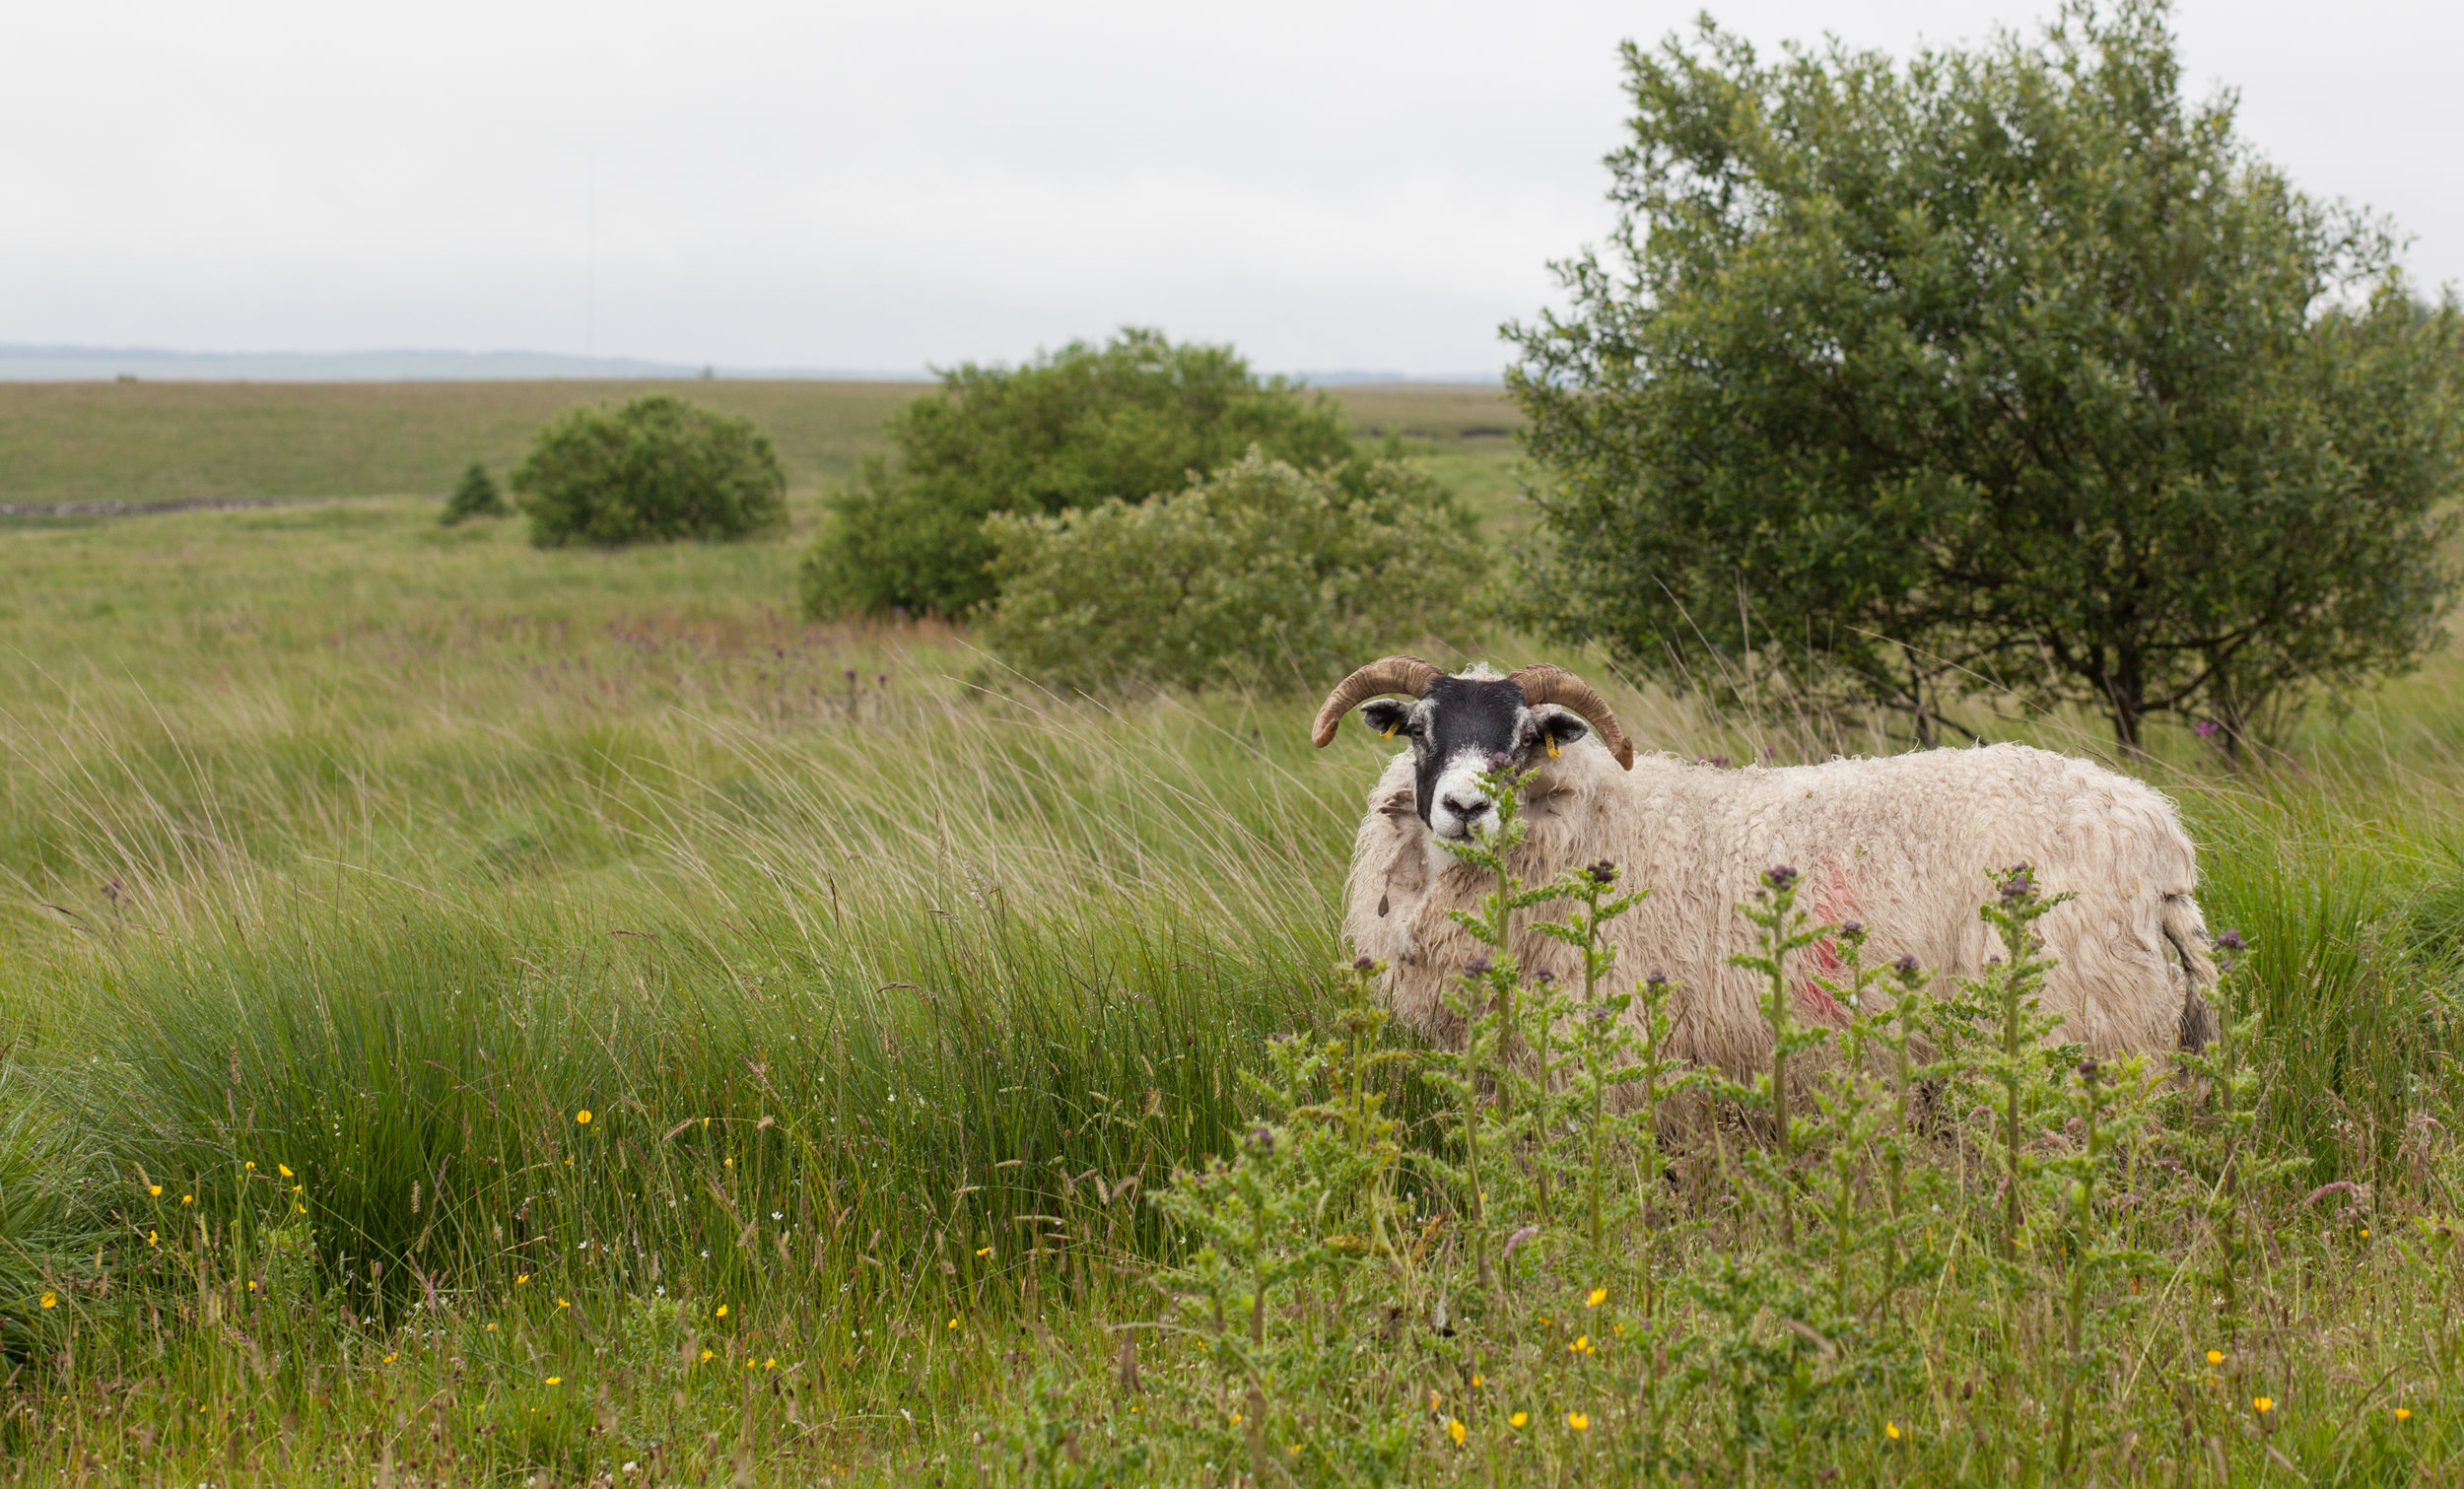 A horned sheep poses for the camera in England.